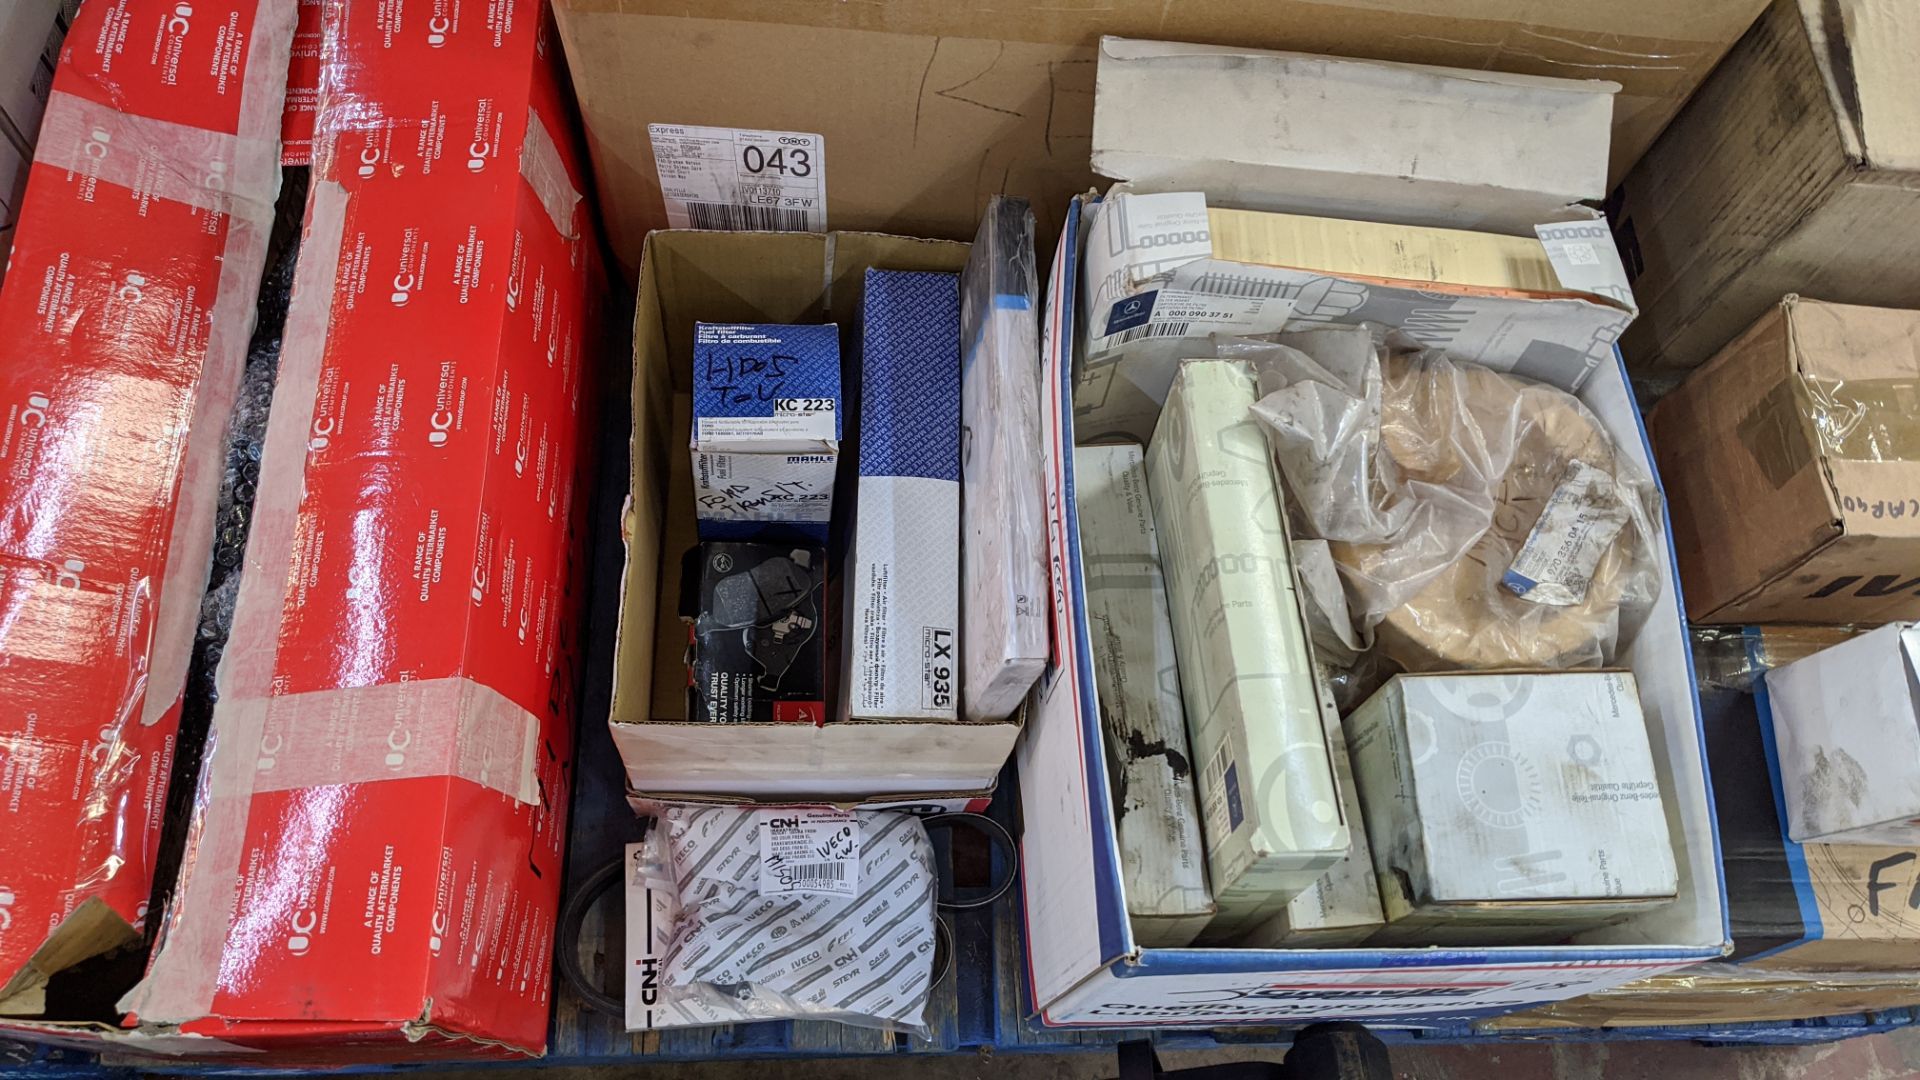 Contents of 3 pallets of De Walt, Draper & Bosch power tools, towing cable, winch cable, vehicle - Image 16 of 23